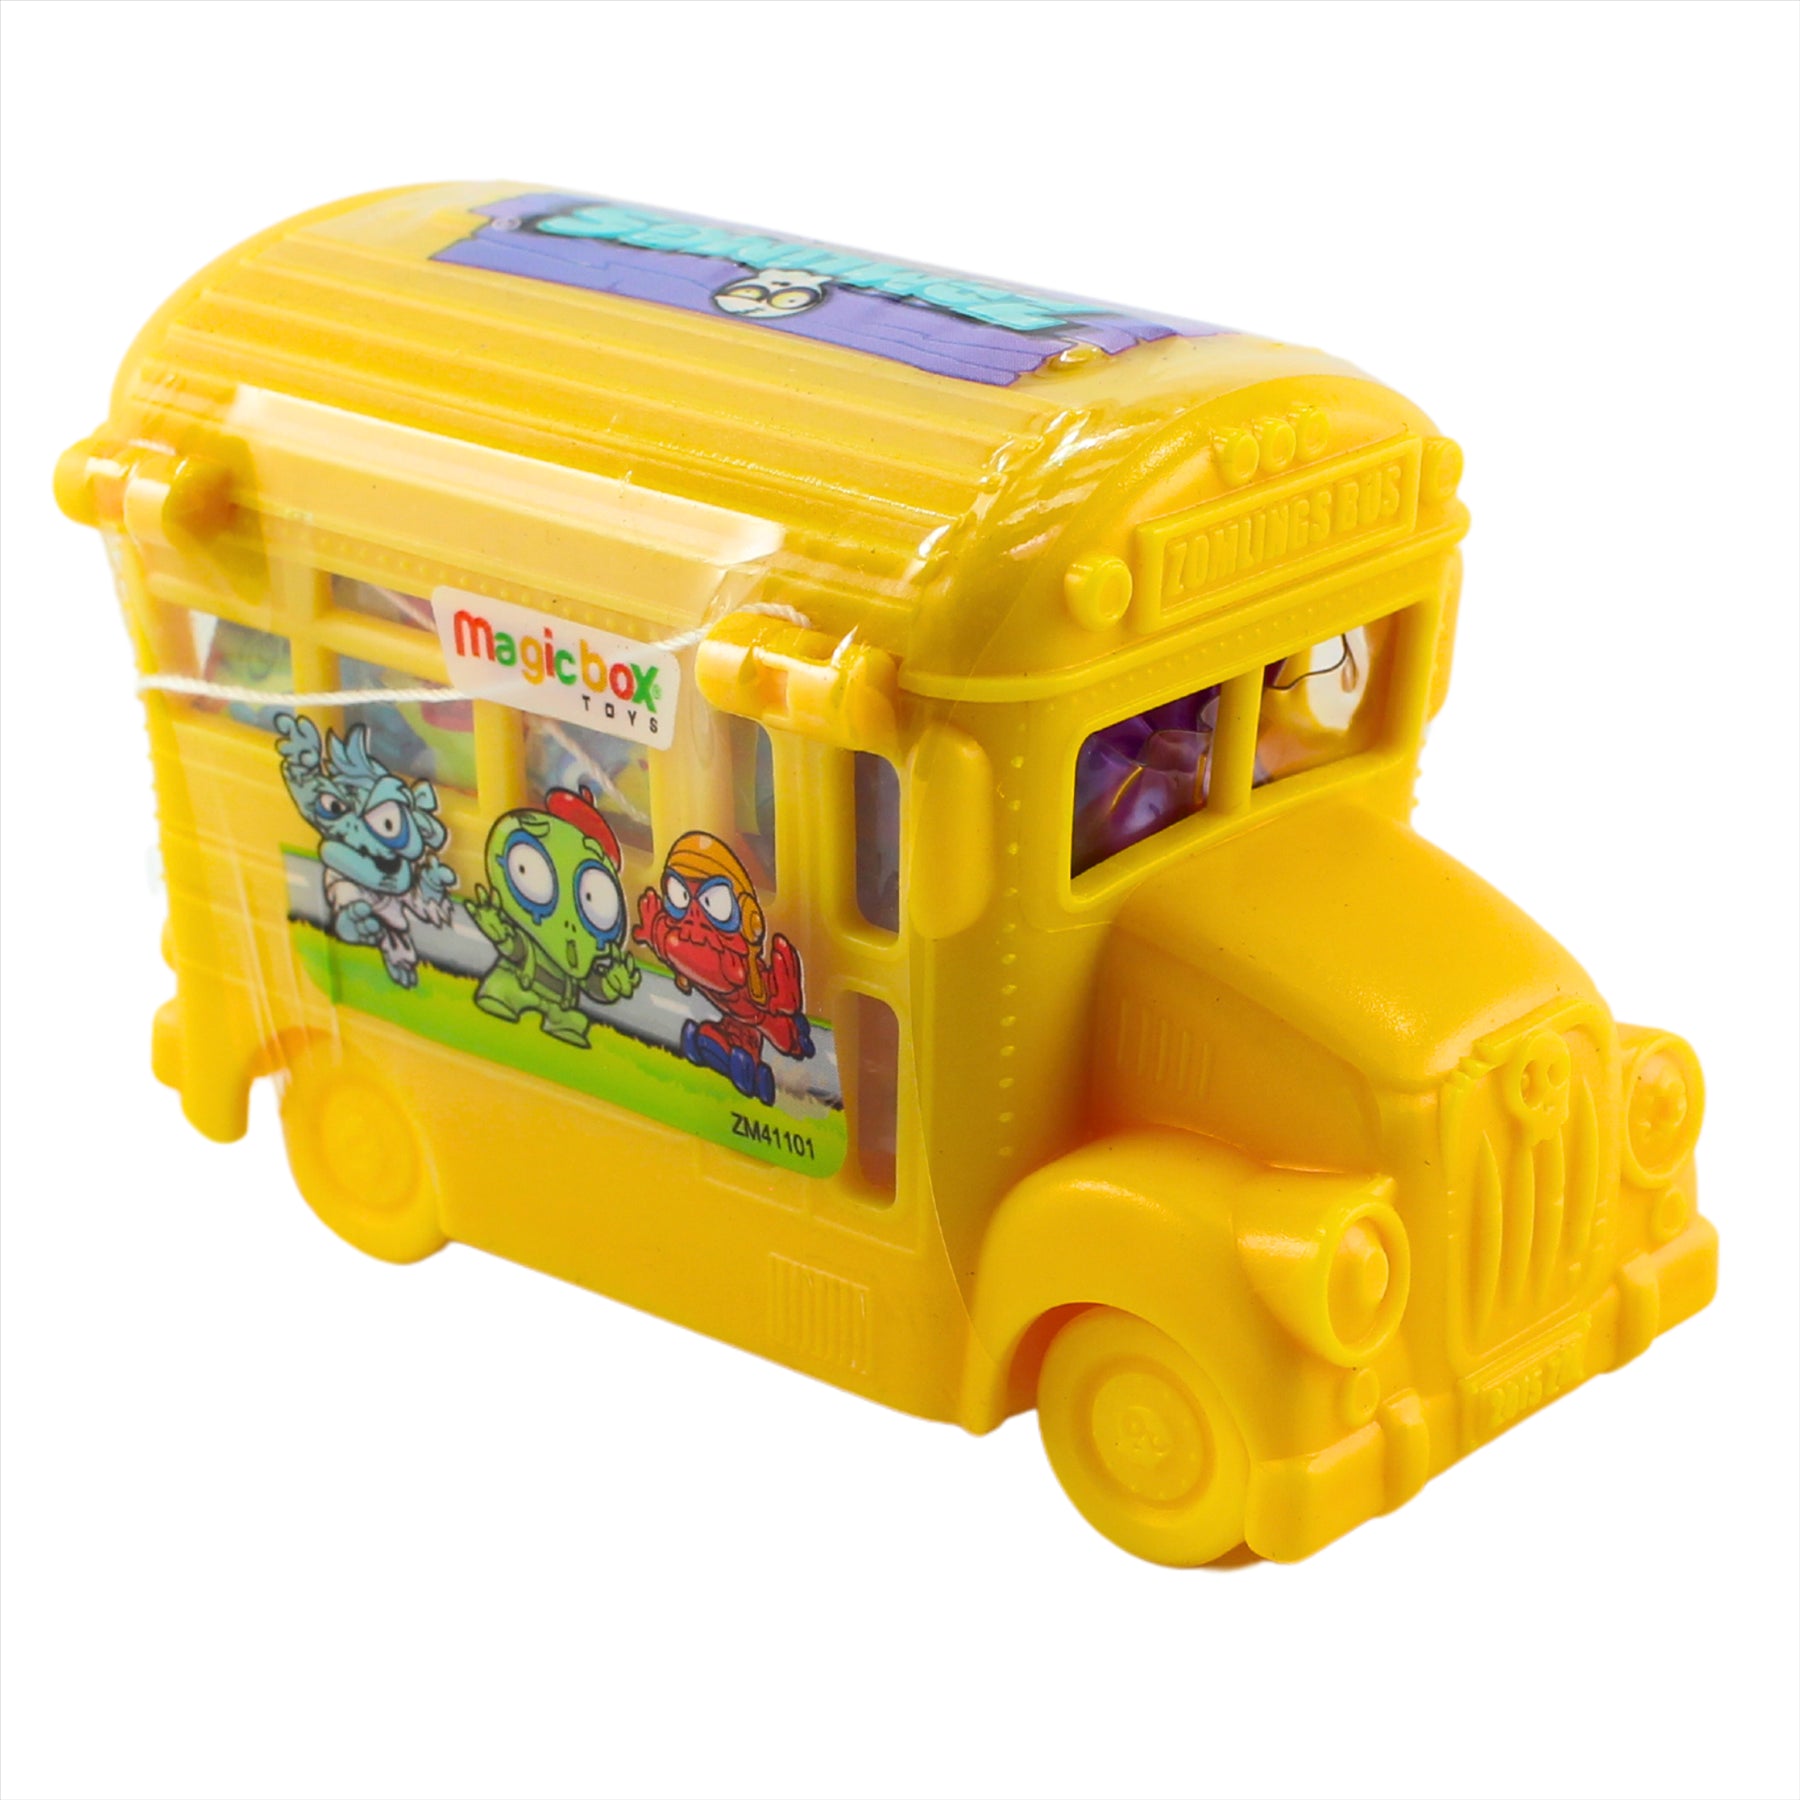 Zomlings in The Town - Series 4 Zom-Mobiles - Red, Blue, & Yellow Buses - 2 Zomlings per Bus - Pack of 6 - Toptoys2u